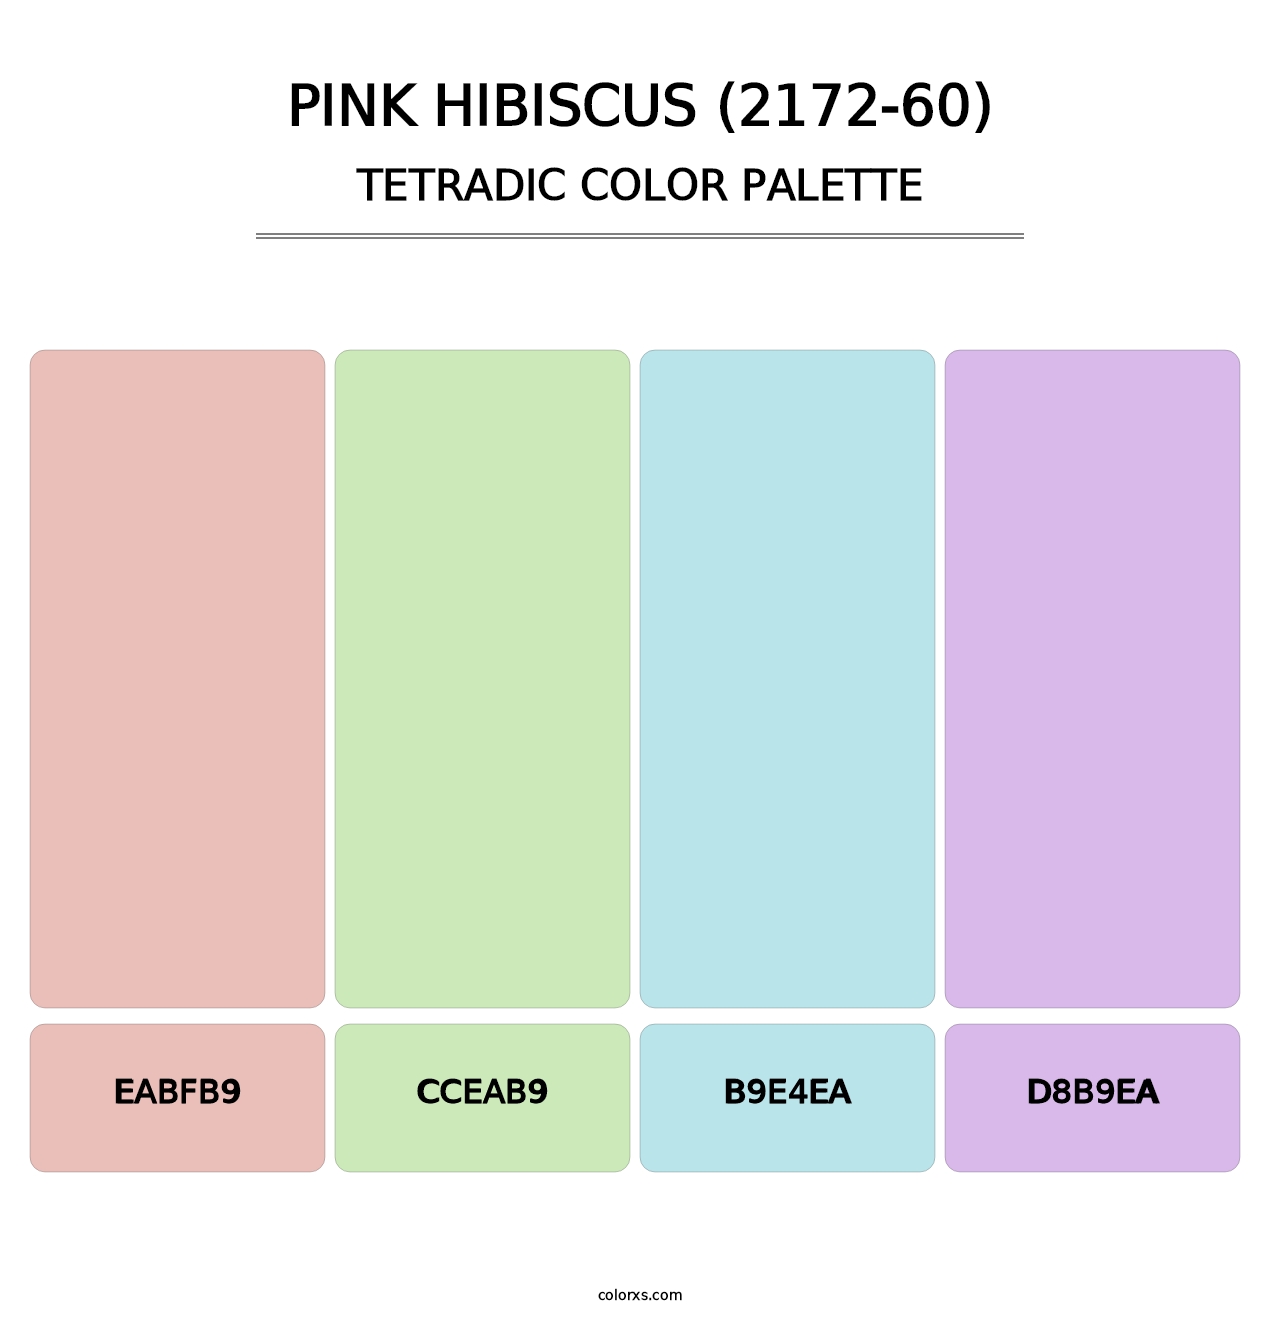 Pink Hibiscus (2172-60) - Tetradic Color Palette